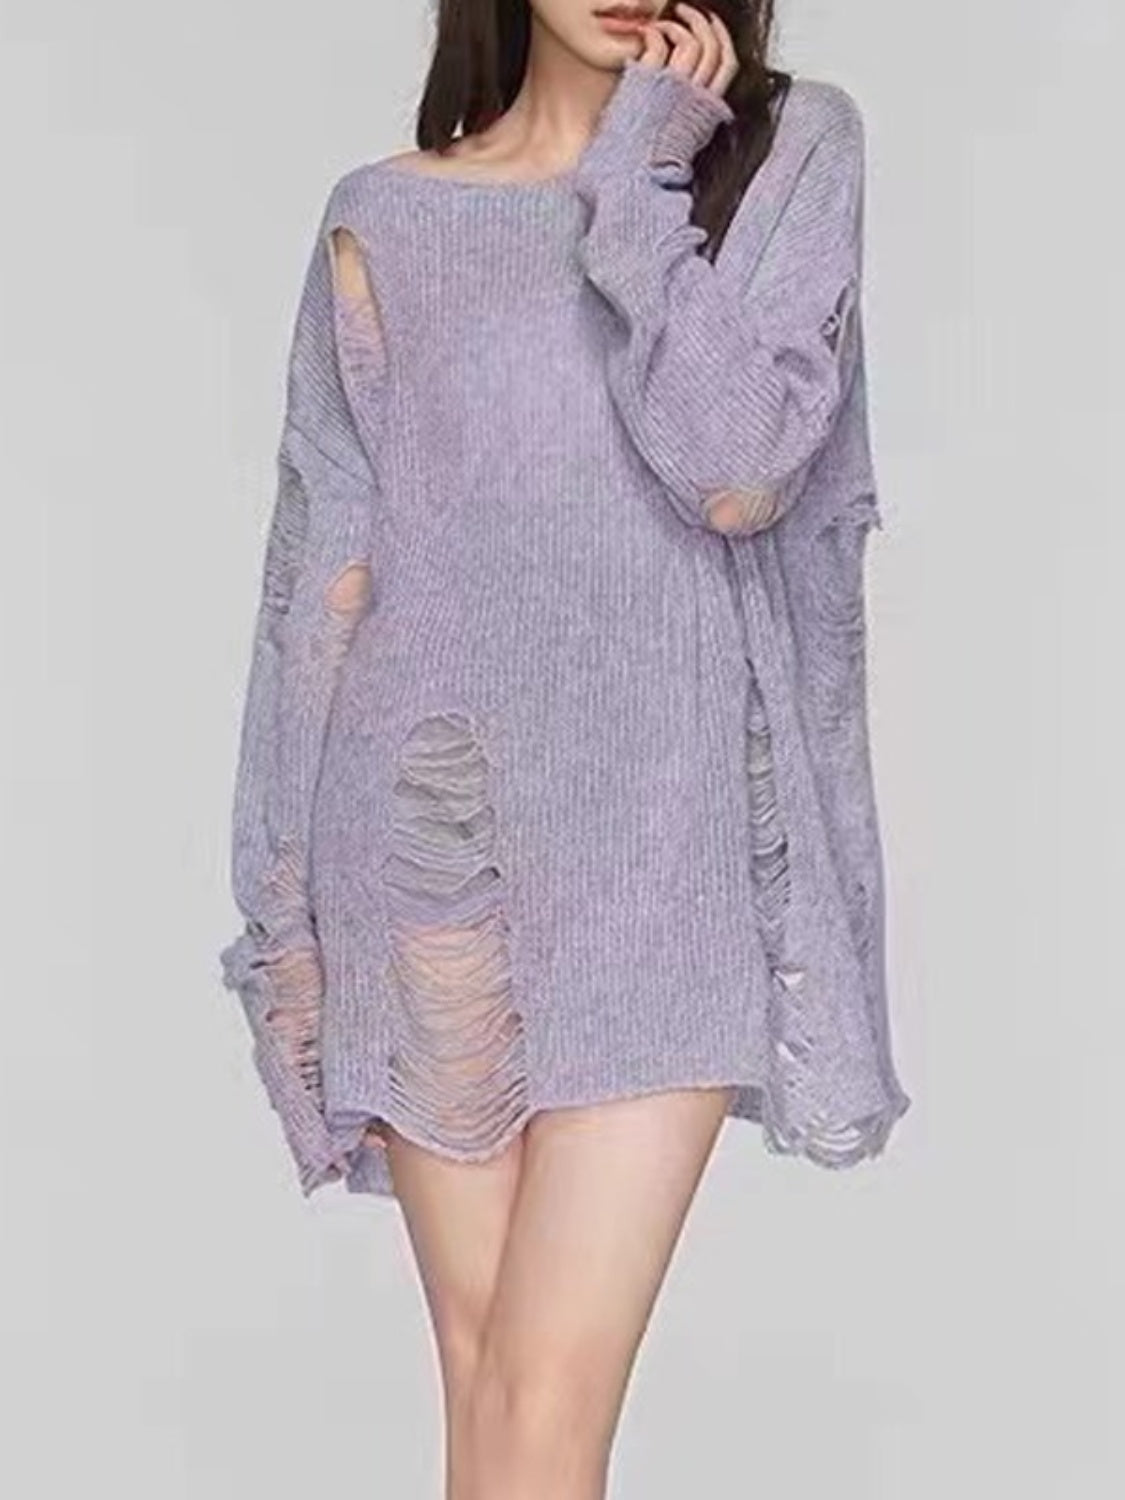 Distressed Boat Neck Knit Cover Up